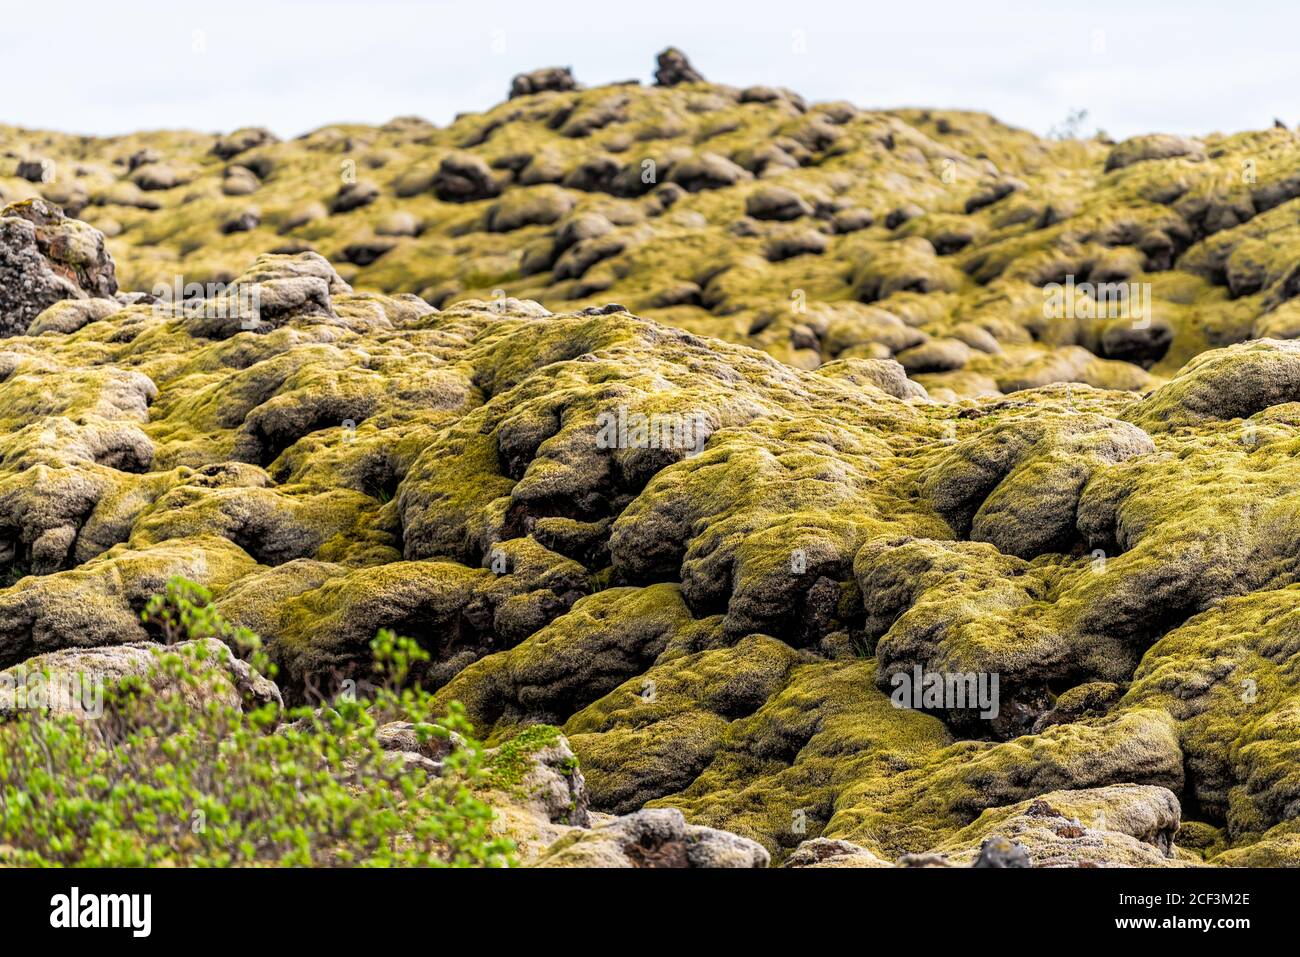 Rock shapes in Iceland yellow green moss covered stones in southern ring road showing pattern and texture Stock Photo